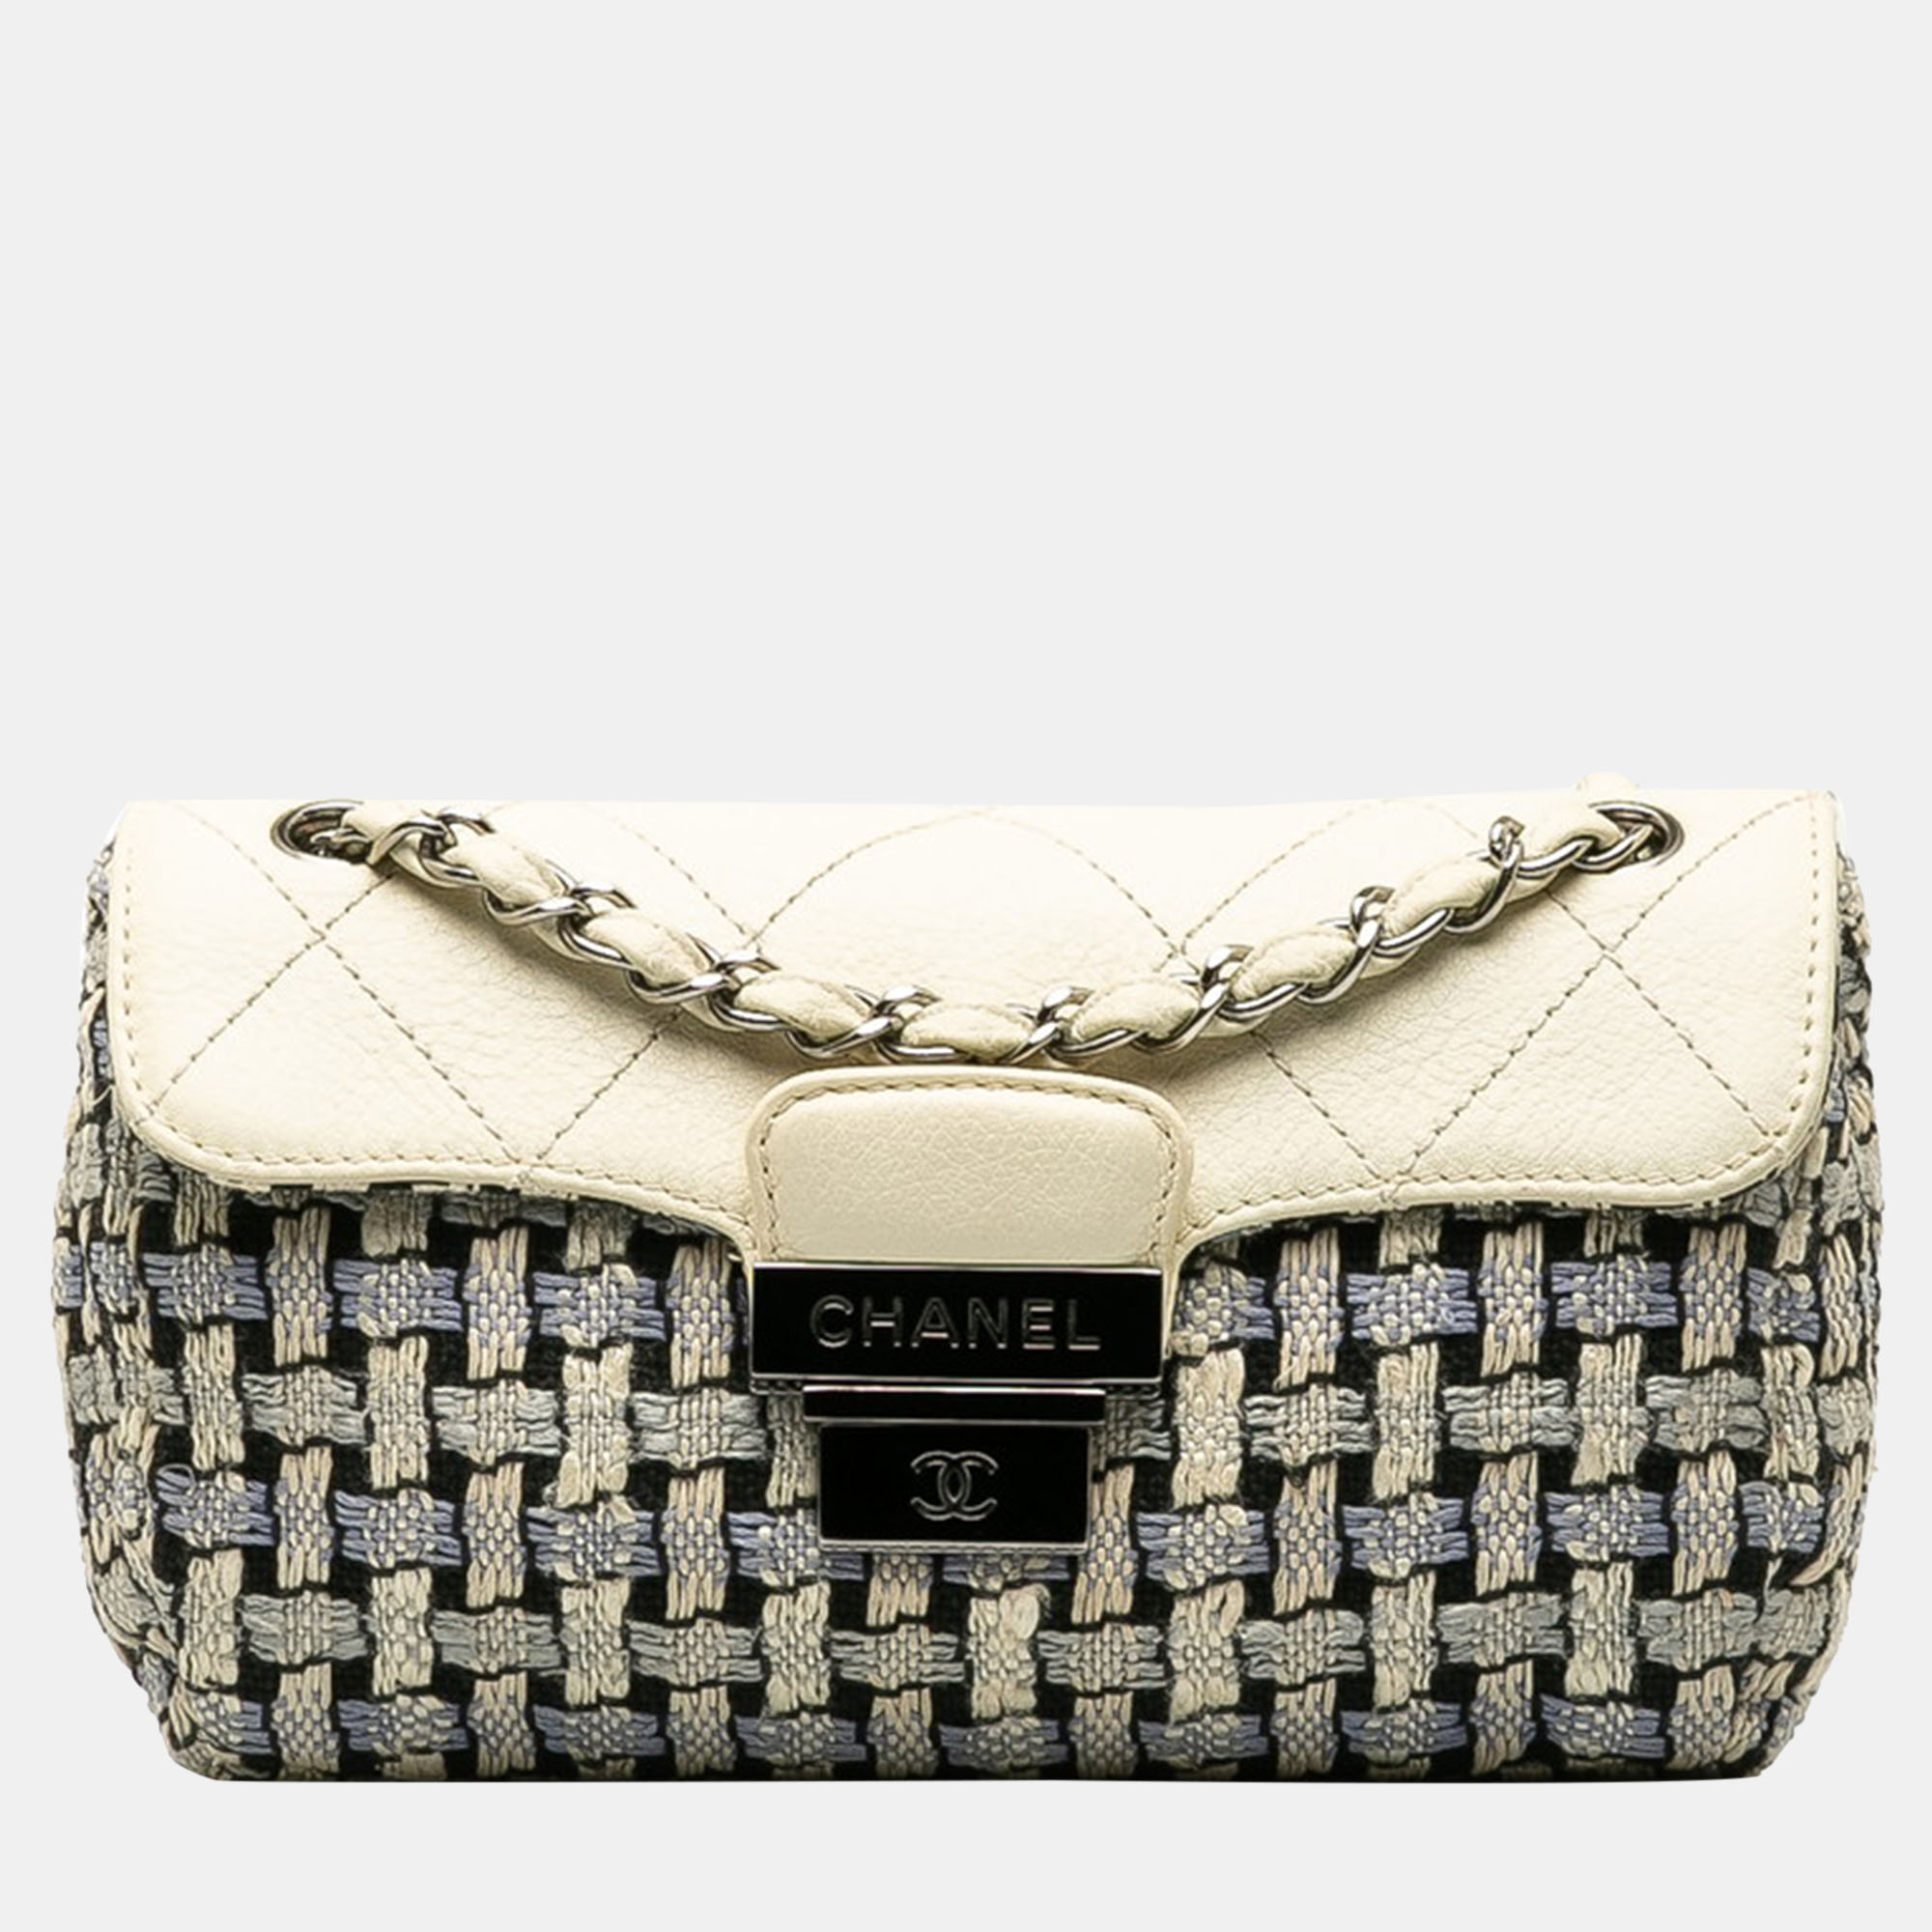 

Chanel Blue Leather Tweed and Calfskin Single Flap Bag, Cream